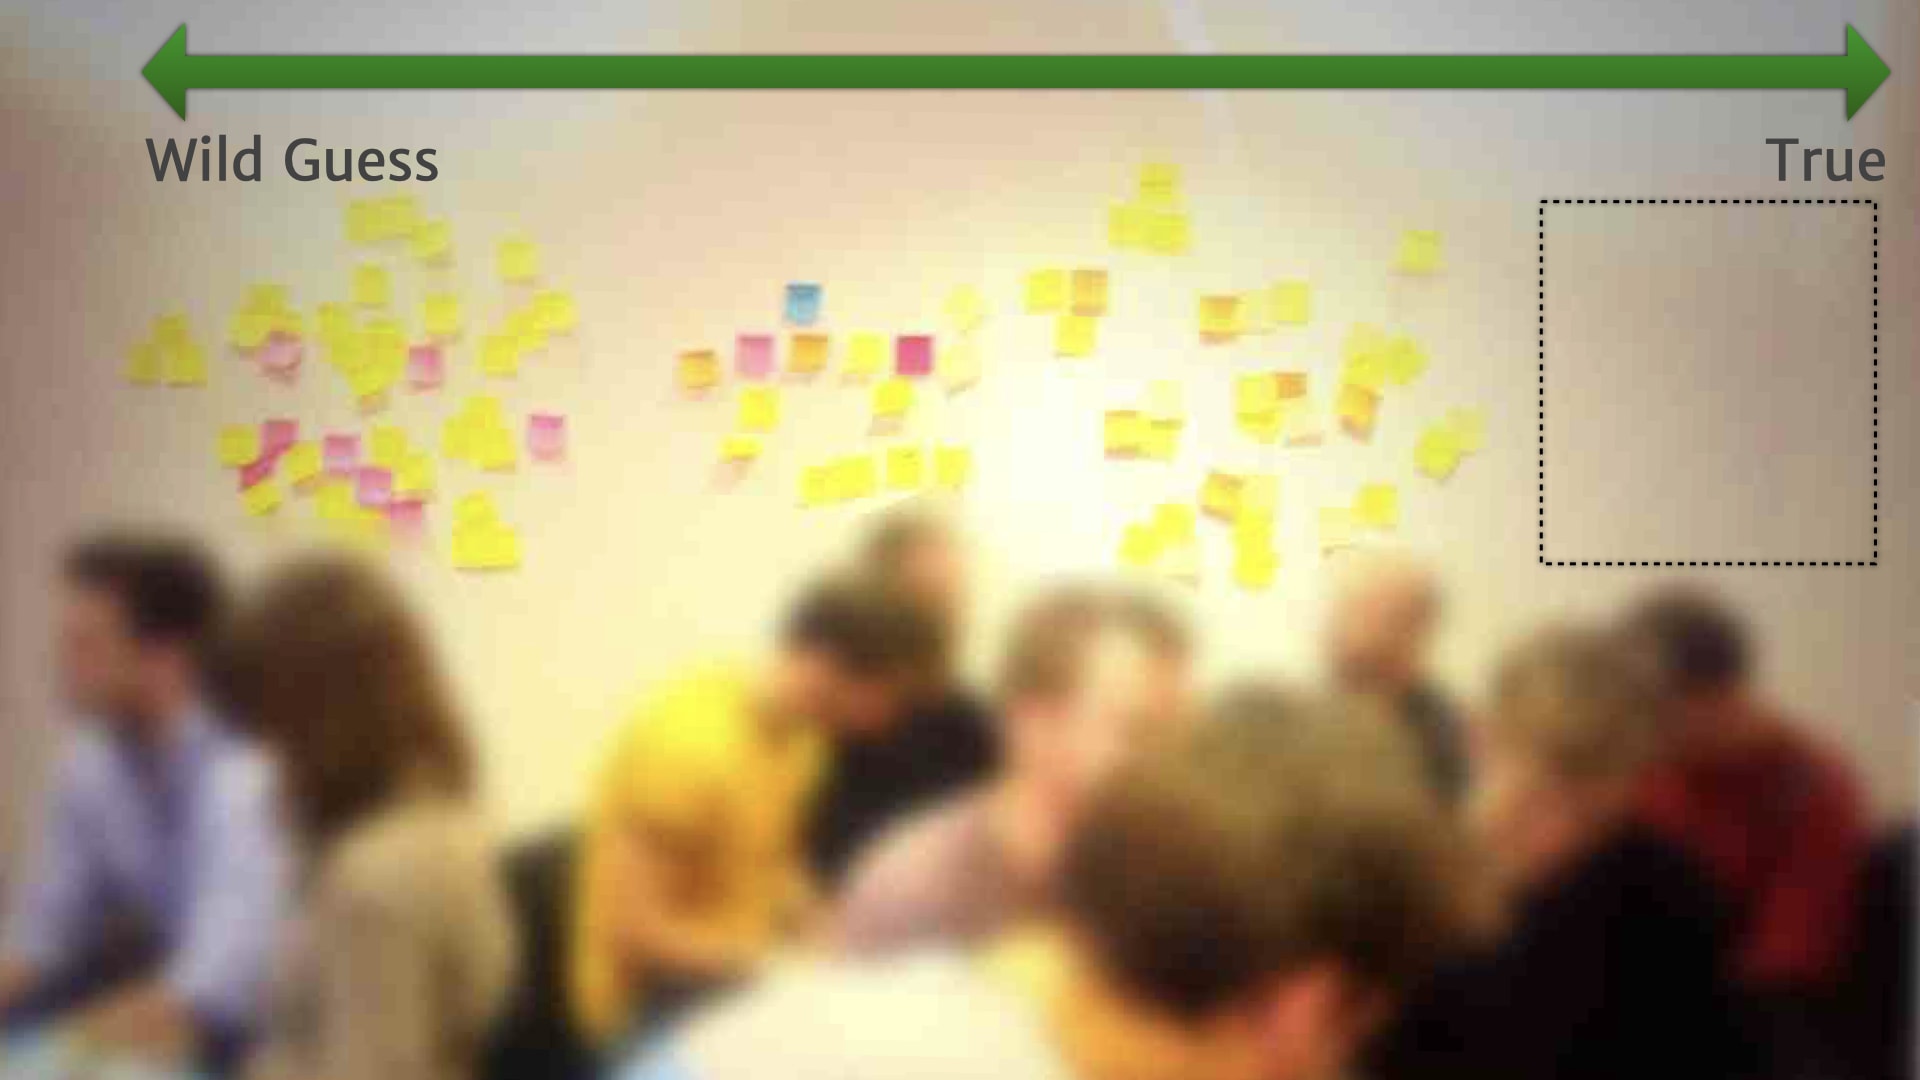 A photo of a group of people in front of a wall with lots of post-it notes on. The people have been blurred out. Above the post-it notes there is a scale that goes from 'Wild Guess' on the left to 'True' on the right. The right end of the scale has been extended further right — so no post-it notes are underneath. This blank area of wall is highlighted.